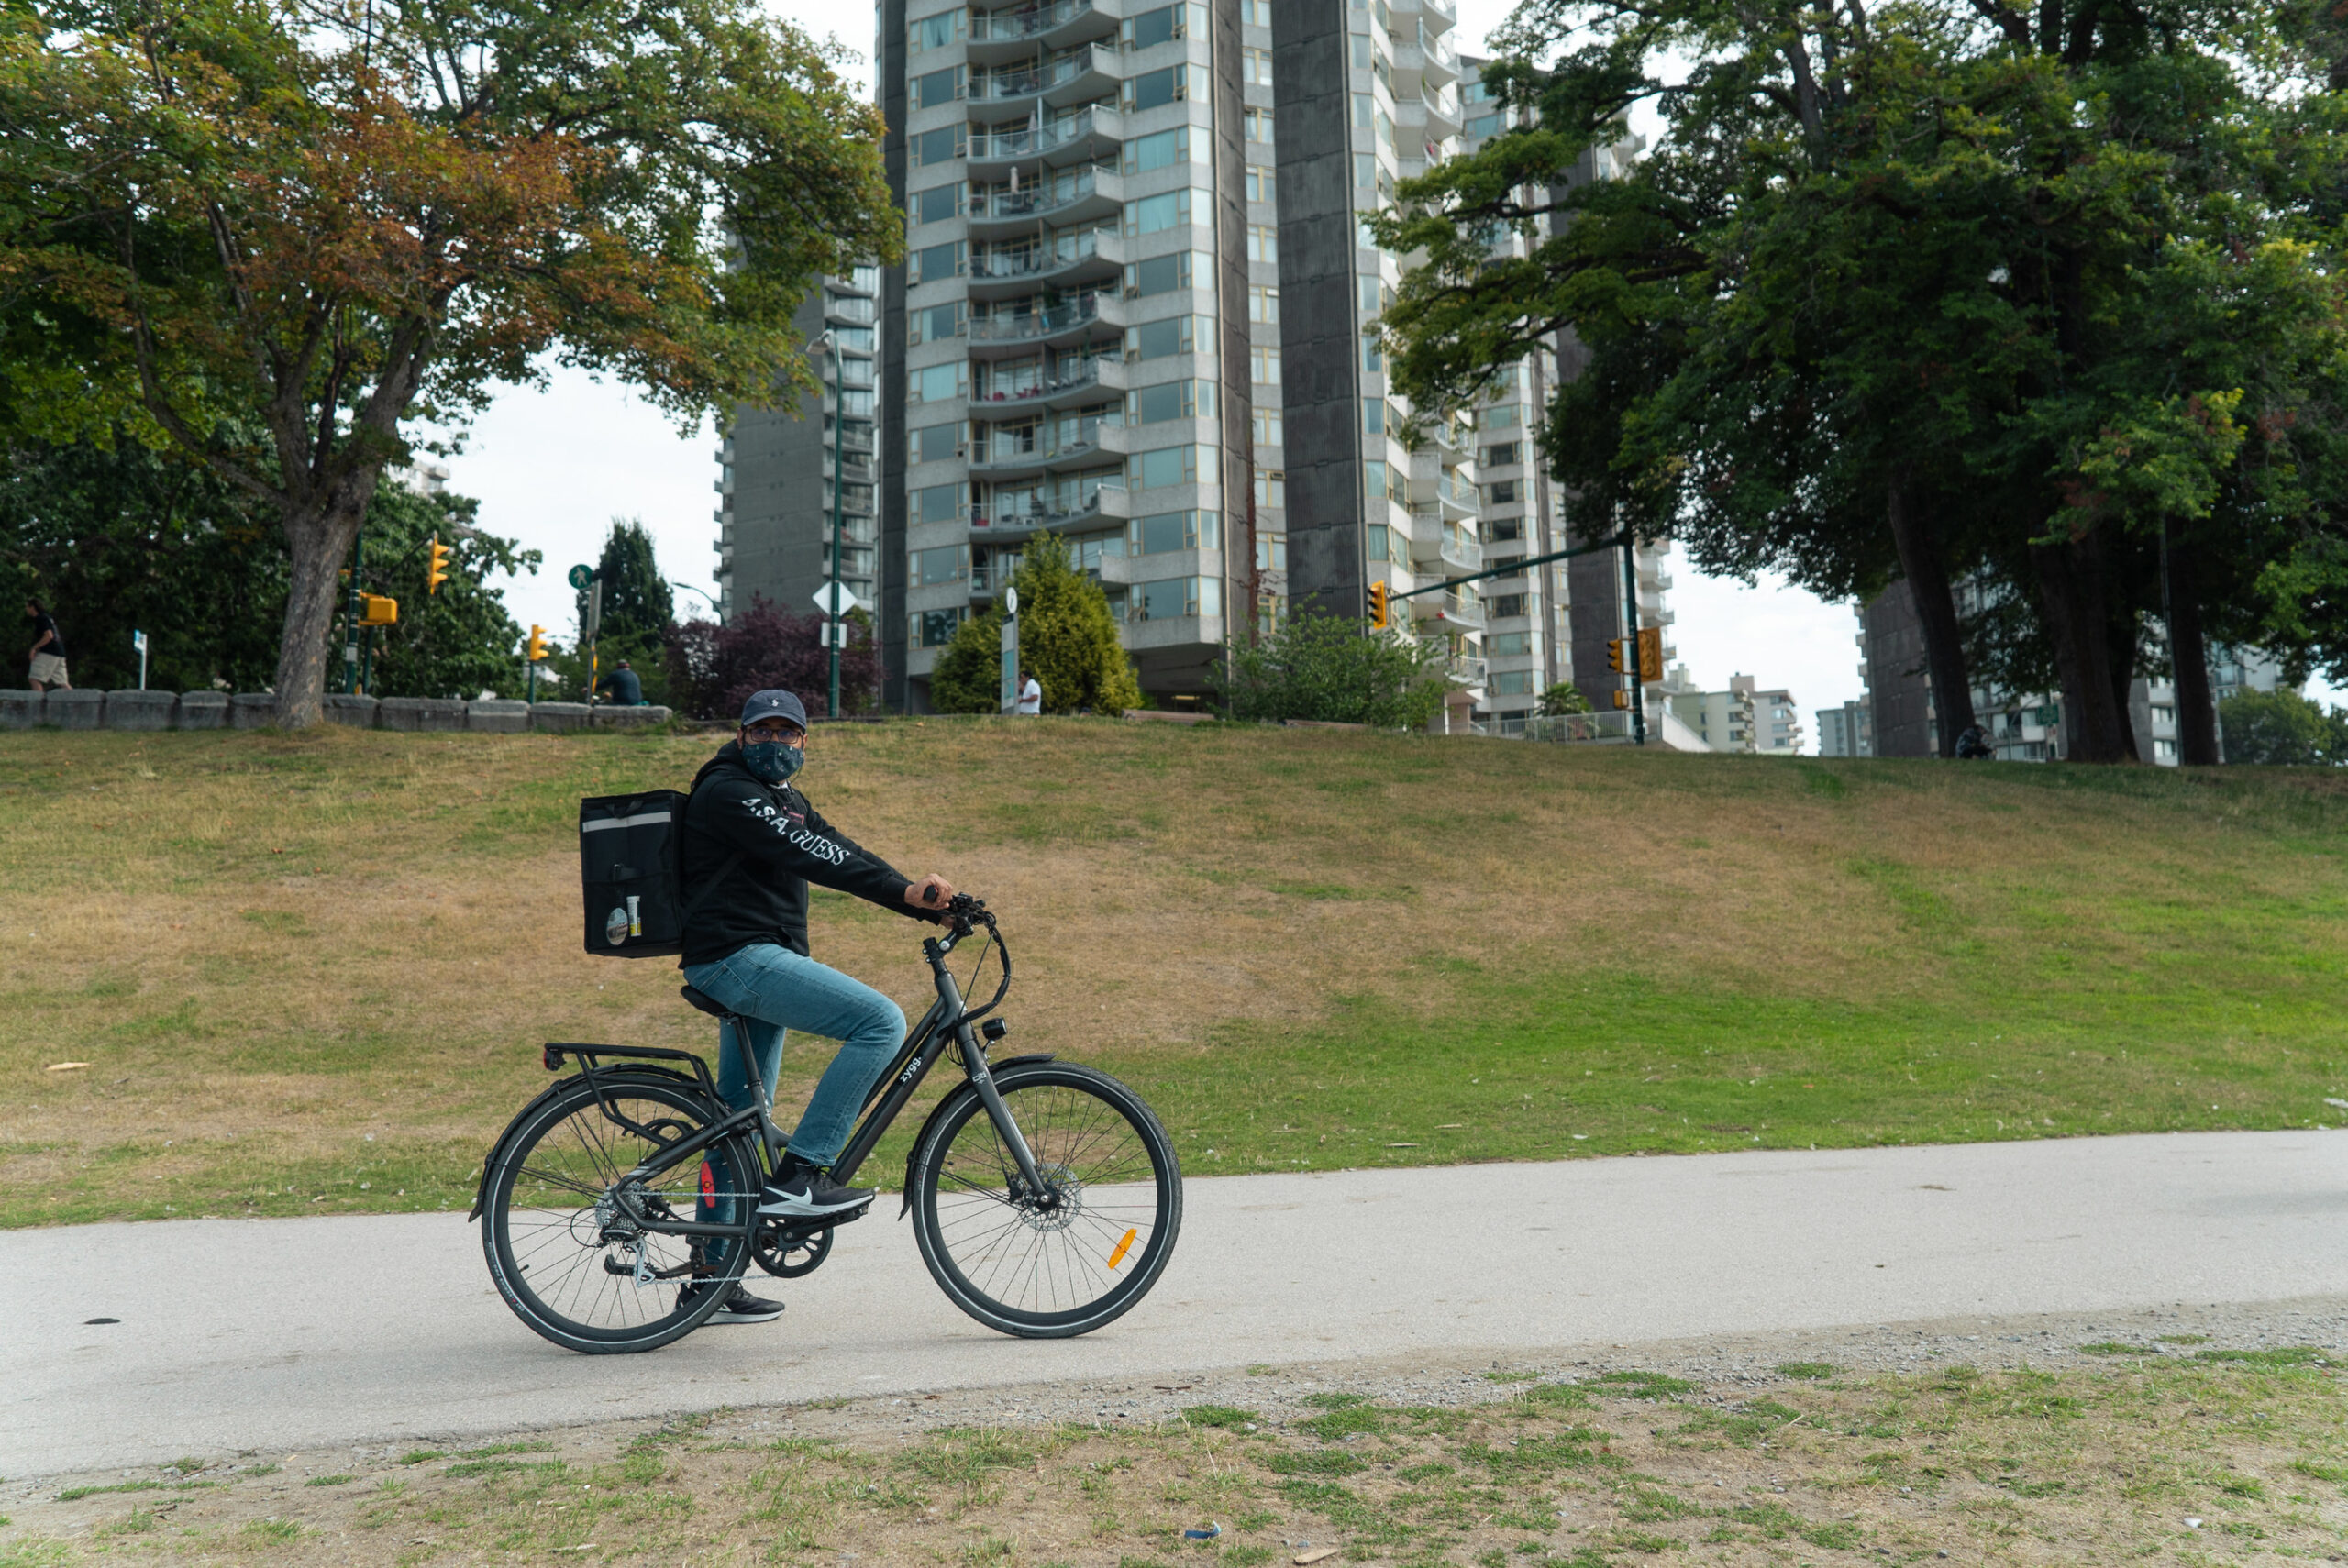 Zygg-Canada-s first Subscription Electrical Bike service launche